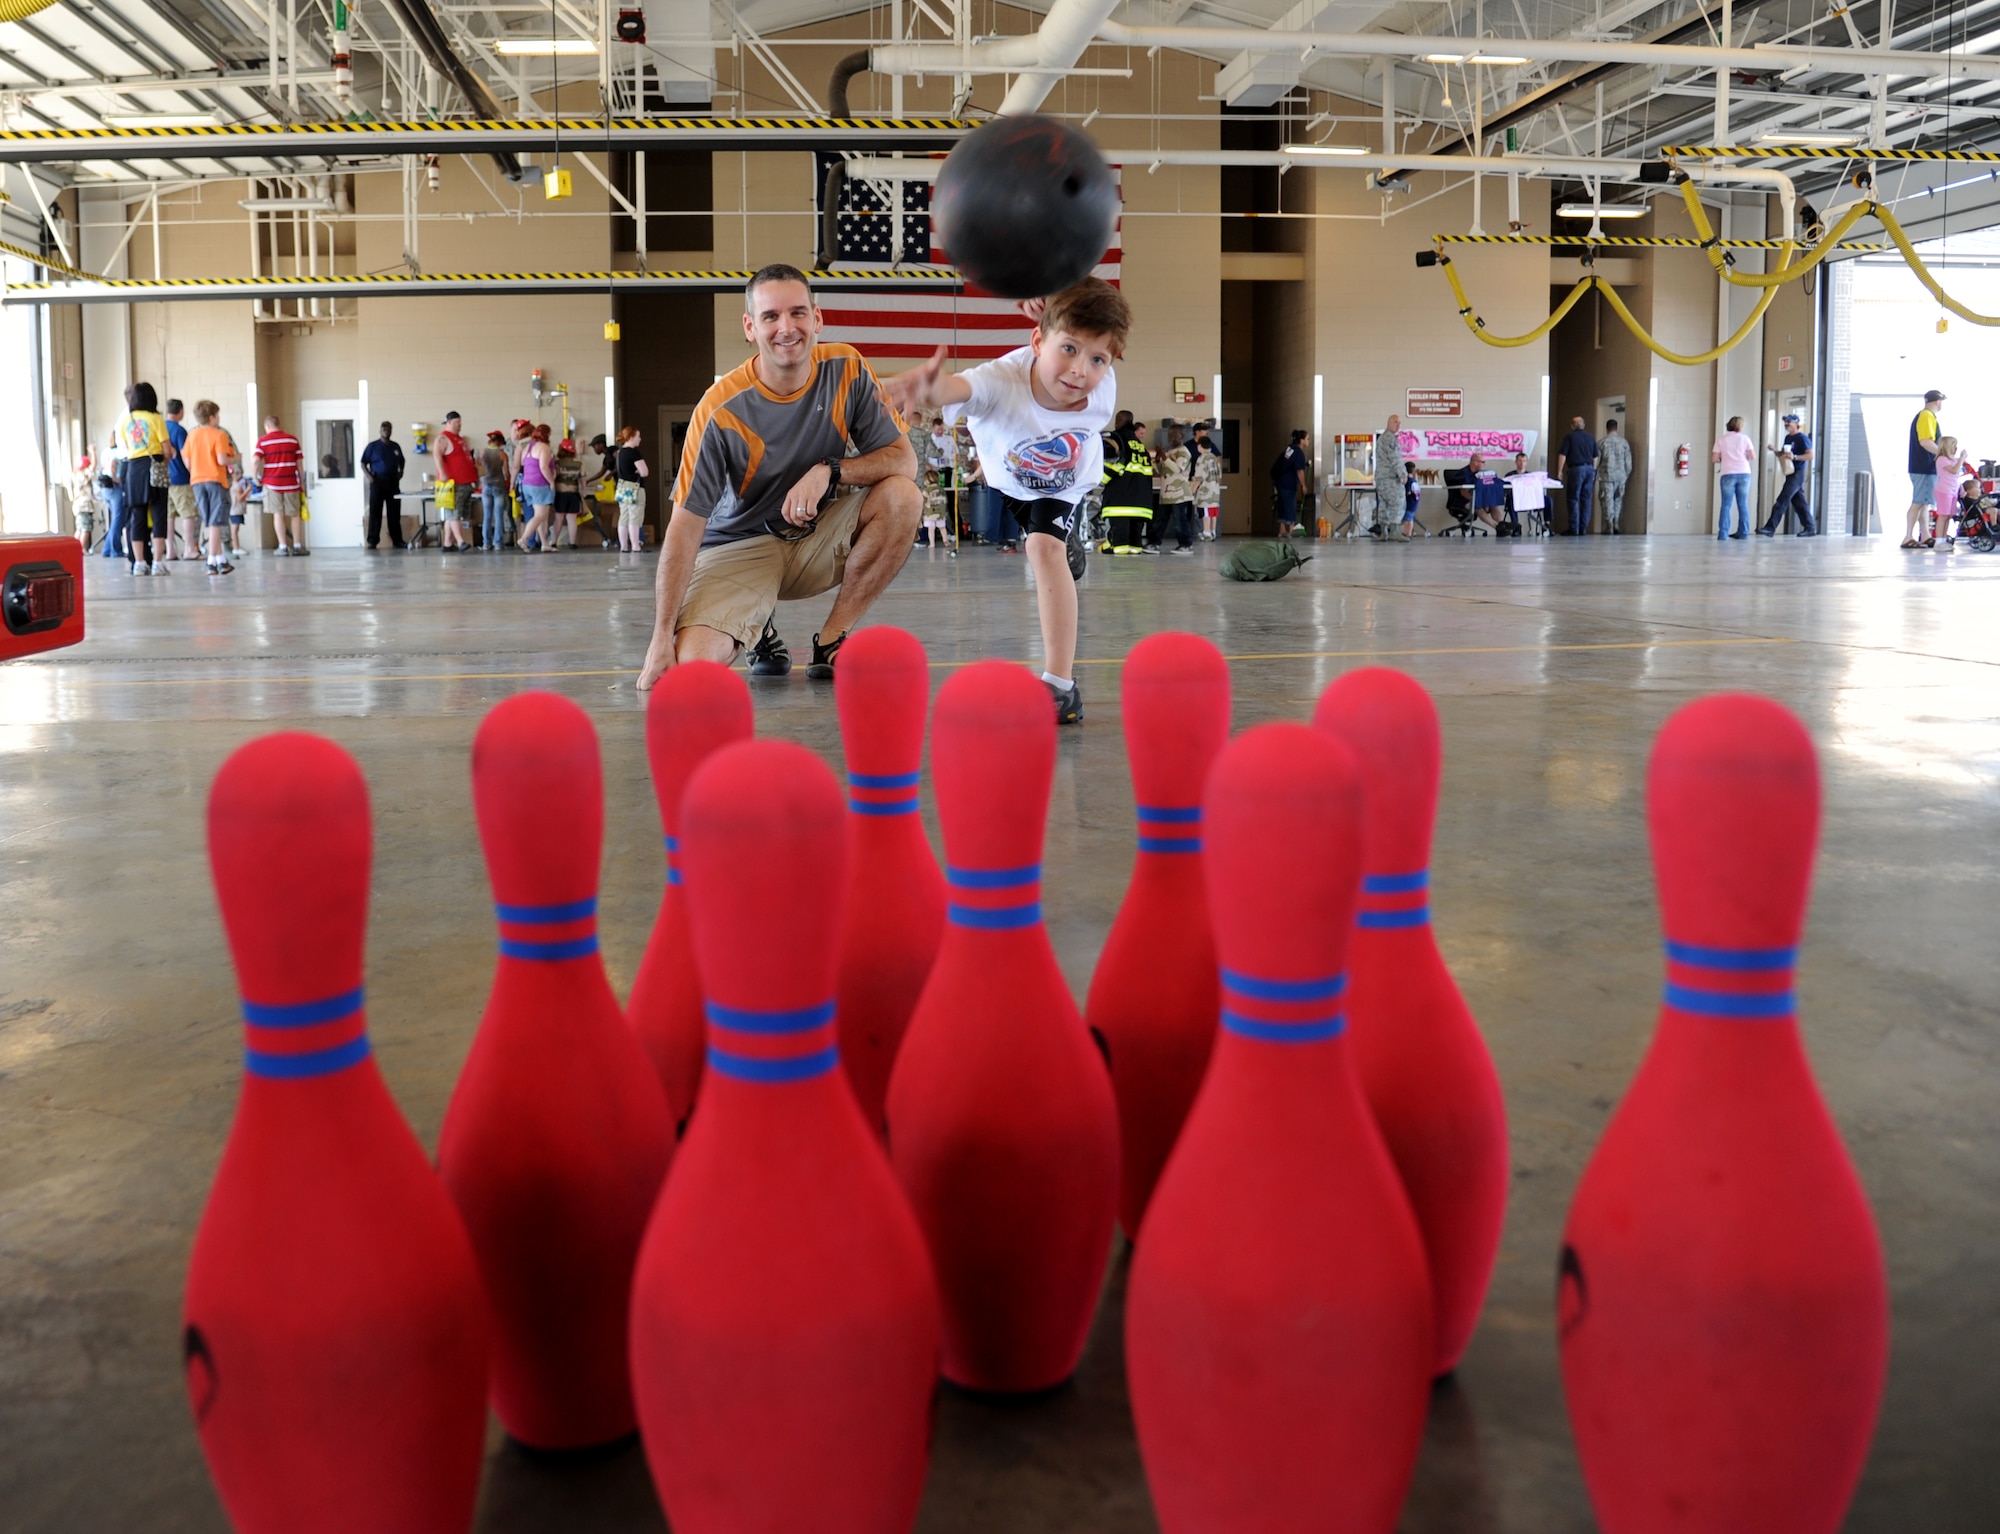 Maj. Matthew Pignataro, 81st Security Forces Squadron commander, watches his son, A.J., 7, toss a rubber bowling ball at bowling pins during the Keesler Fire Department’s open house Oct. 13, 2012, Keesler Air Force Base, Miss.  The event was held on the final day of fire prevention week during which the fire department conducted random fire drills throughout the base, toured various facilities with Sparky the Fire Dog, passed out fire safety handouts and fire hats for children and provided stove and fire extinguisher demonstrations.  A.J.’s mother, Lt. Col. Carolyn Pignataro, 81st Medical Group, is currently deployed to Afghanistan.  (U.S. Air Force photo by Kemberly Groue)